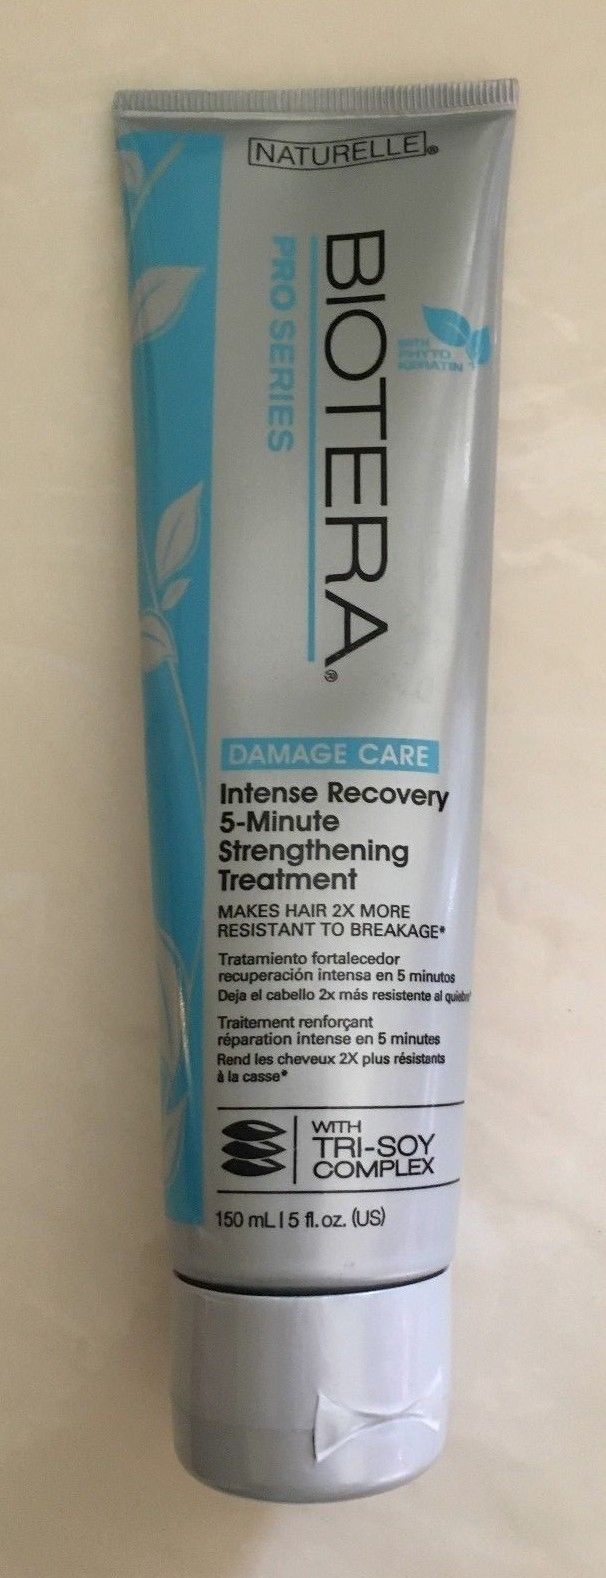 NEW~BIOTERA ProSeries Damage Care Intense Recovery 5 Minute StrengthTreatment